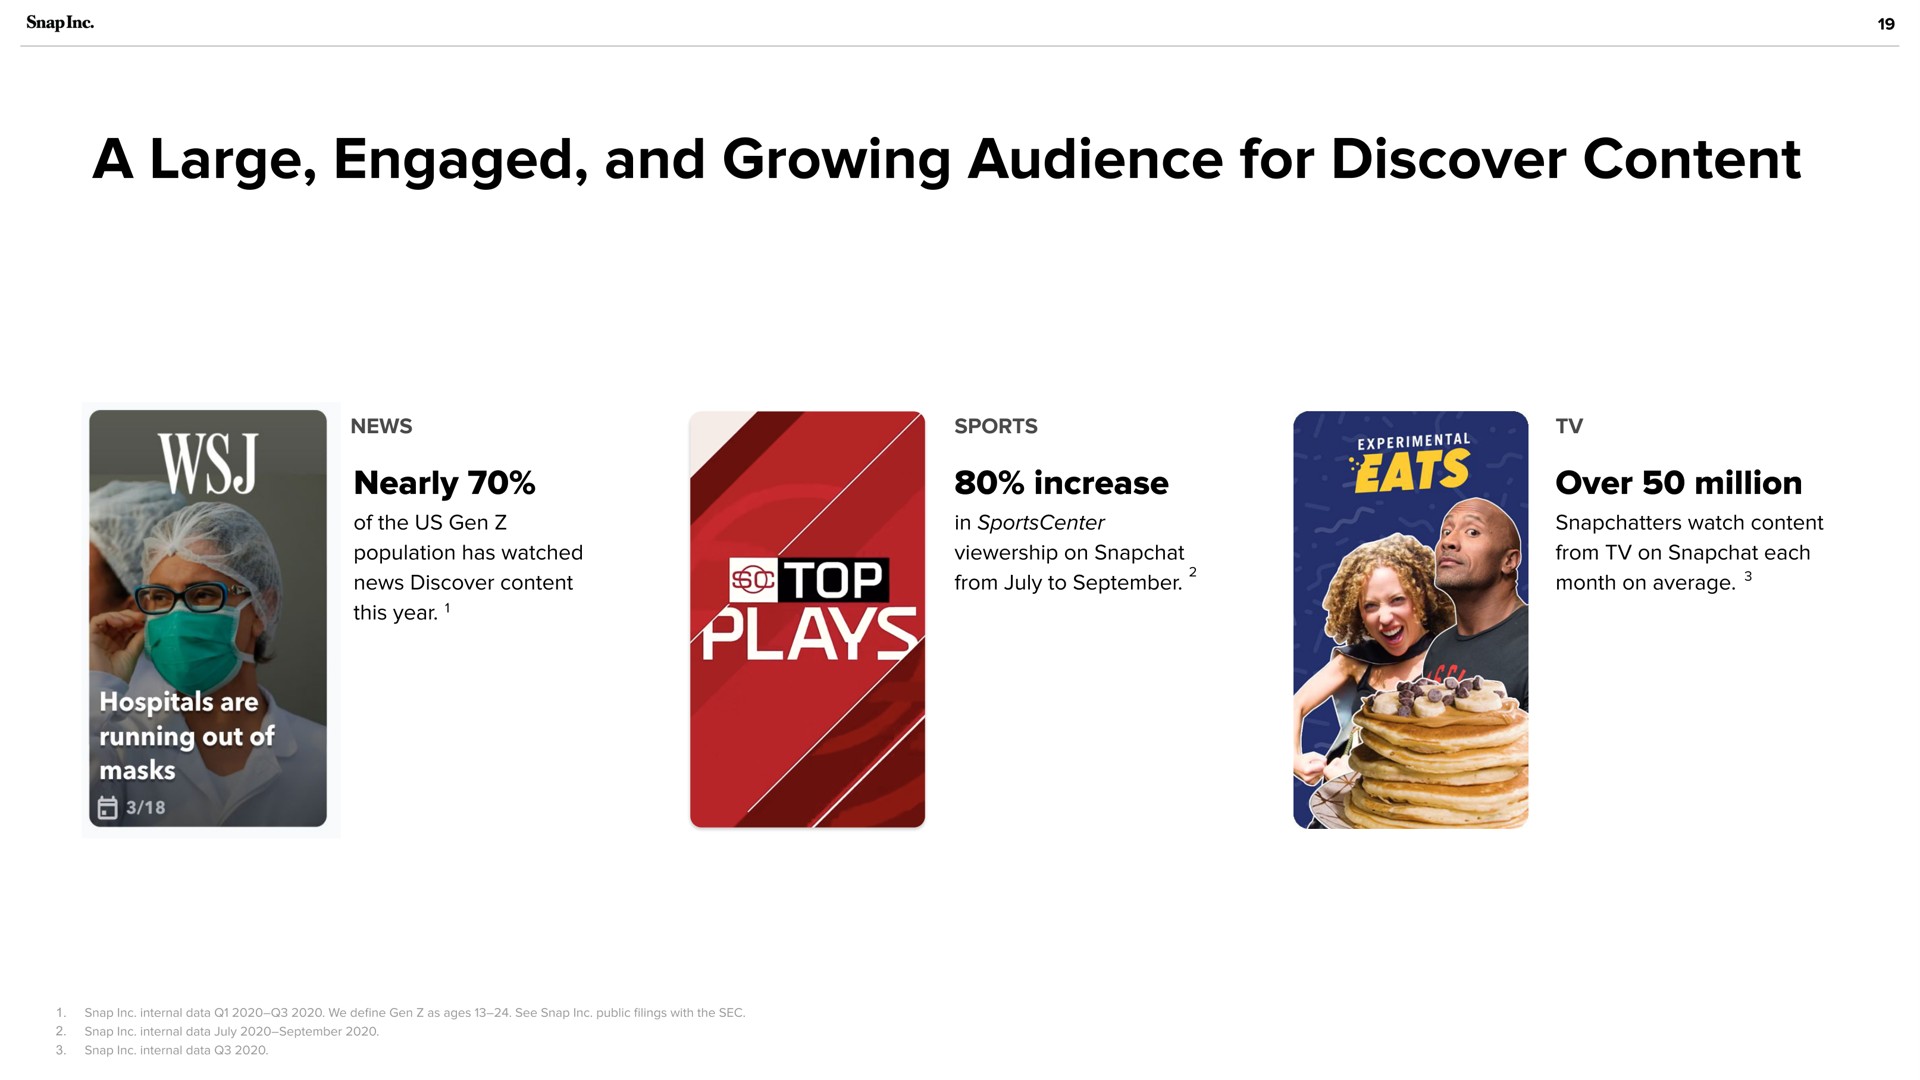 a large engaged and growing audience for discover content | Snap Inc